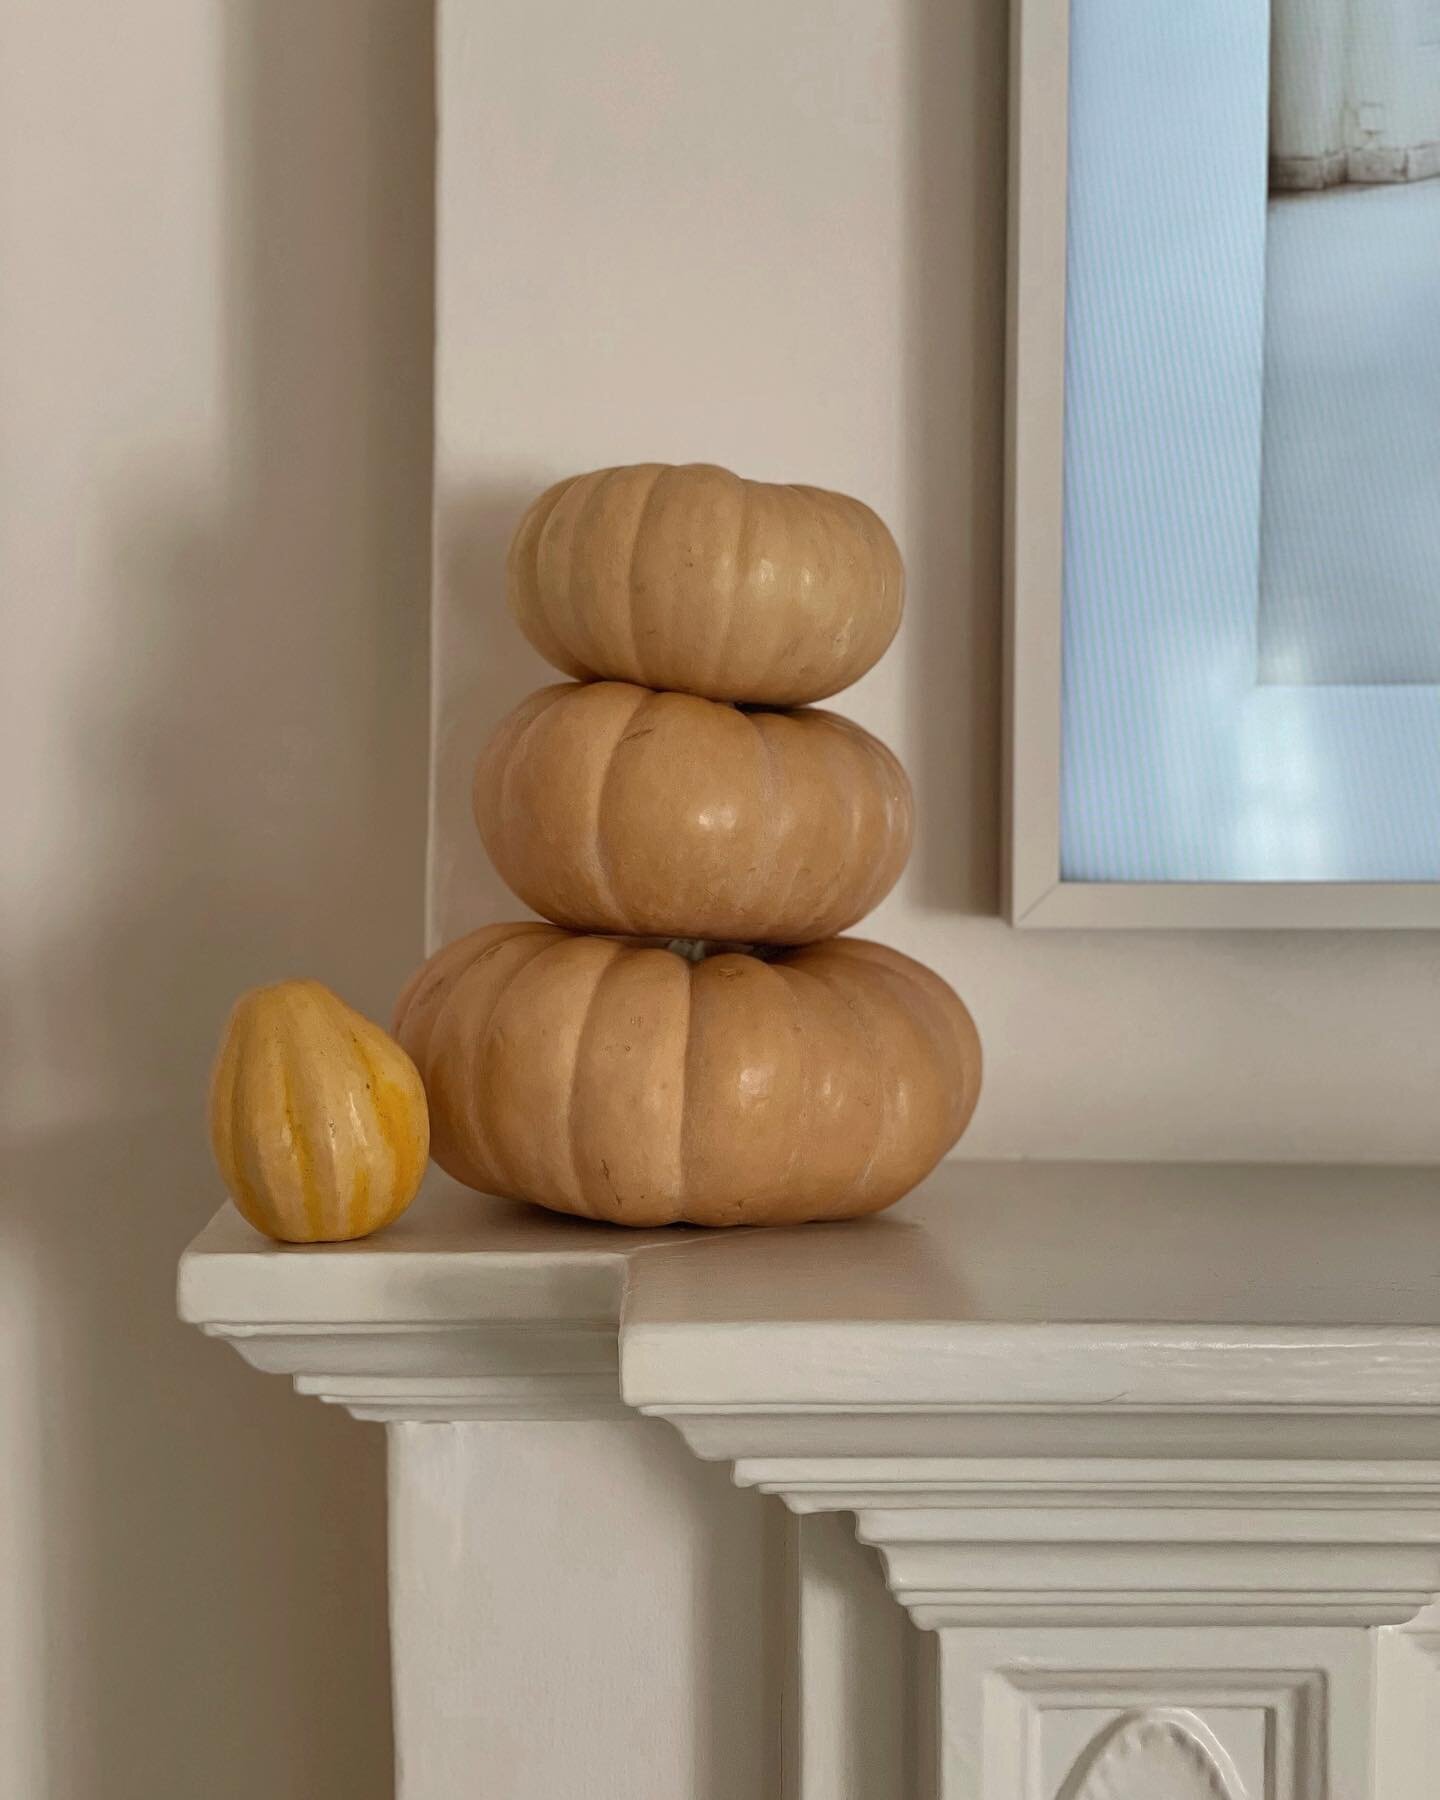 Autumn is literally the cheat sheet of holiday decor. Throw any variety of pumpkin (okayyyy I favor monochromatic) and voila, it&rsquo;s decoration. ⁣
⁣
I don&rsquo;t associate pumpkin&rsquo;s with Halloween. Pumpkins are a sweet way of seeing Summer